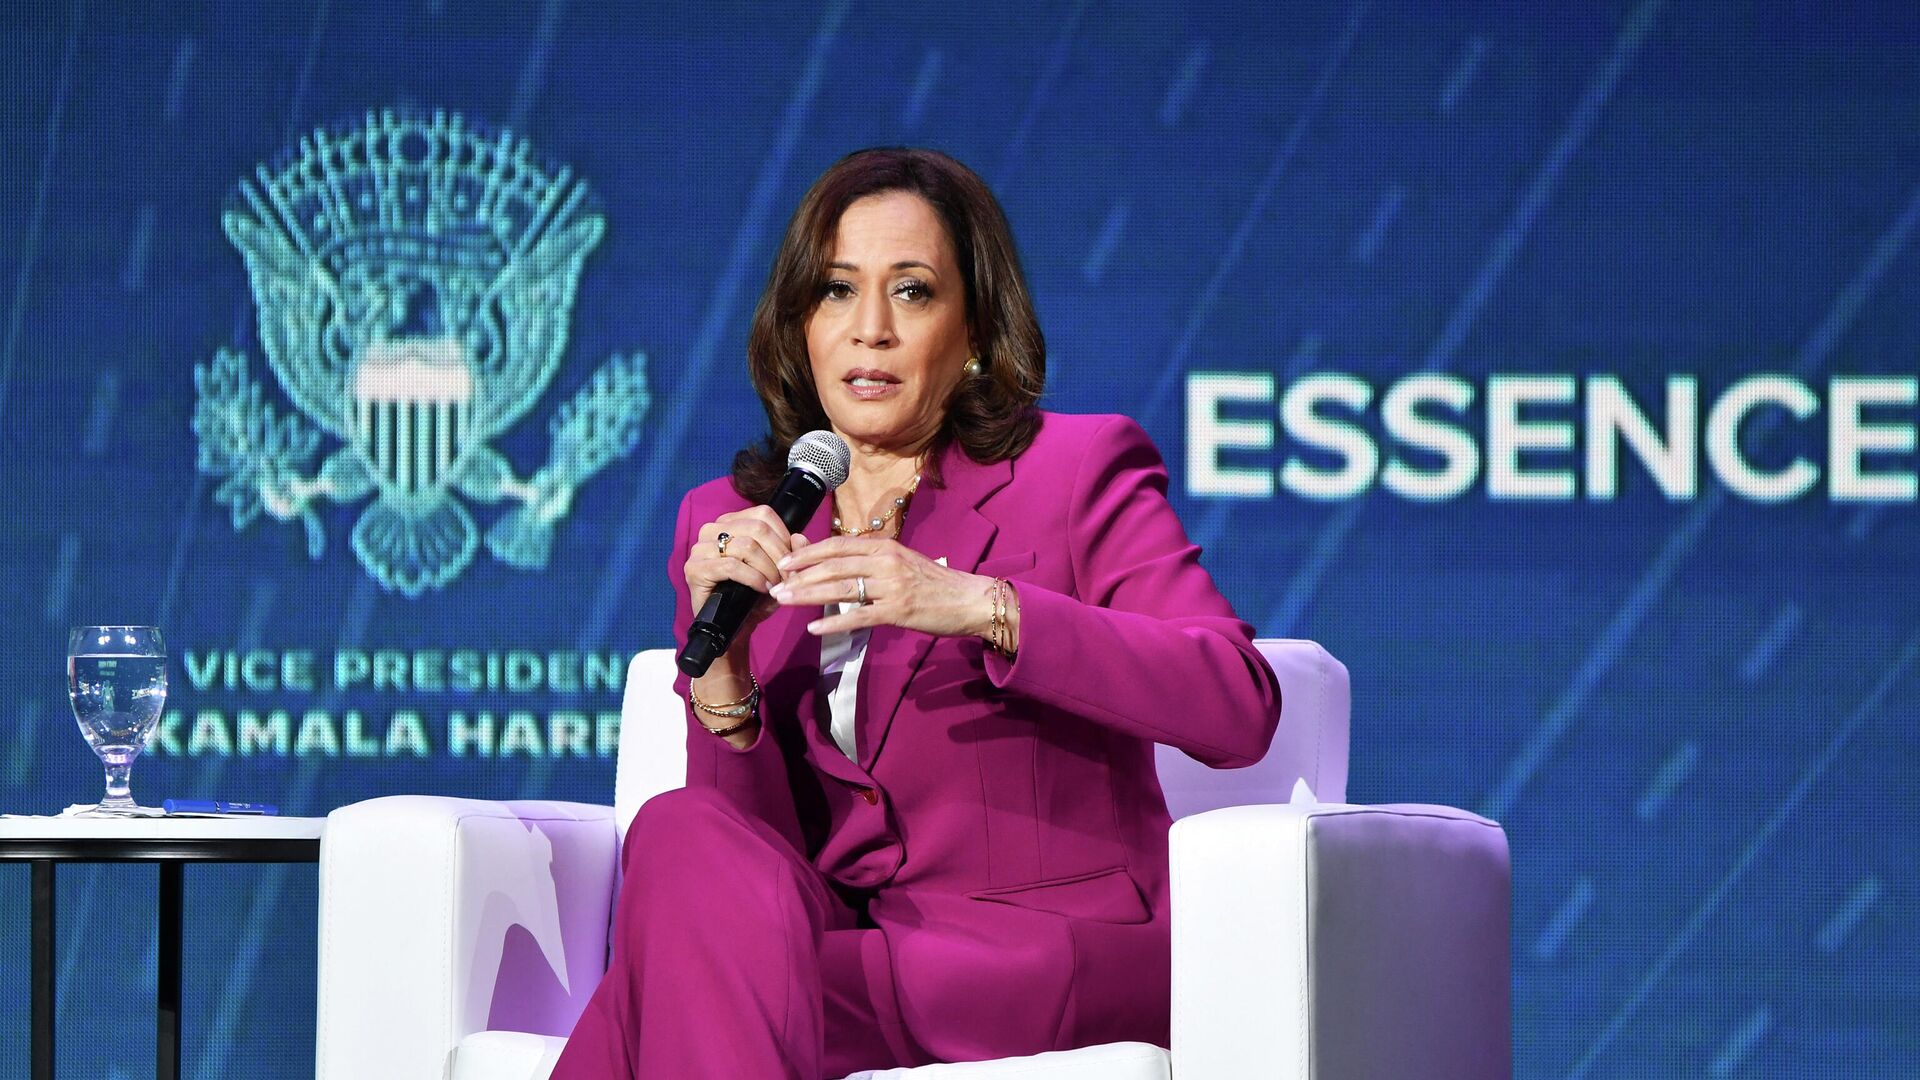 Vice President of the United States Kamala Harris speaks onstage during the 2022 Essence Festival of Culture at the Ernest N. Morial Convention Center on July 2, 2022 in New Orleans, Louisiana. - Sputnik International, 1920, 07.07.2022